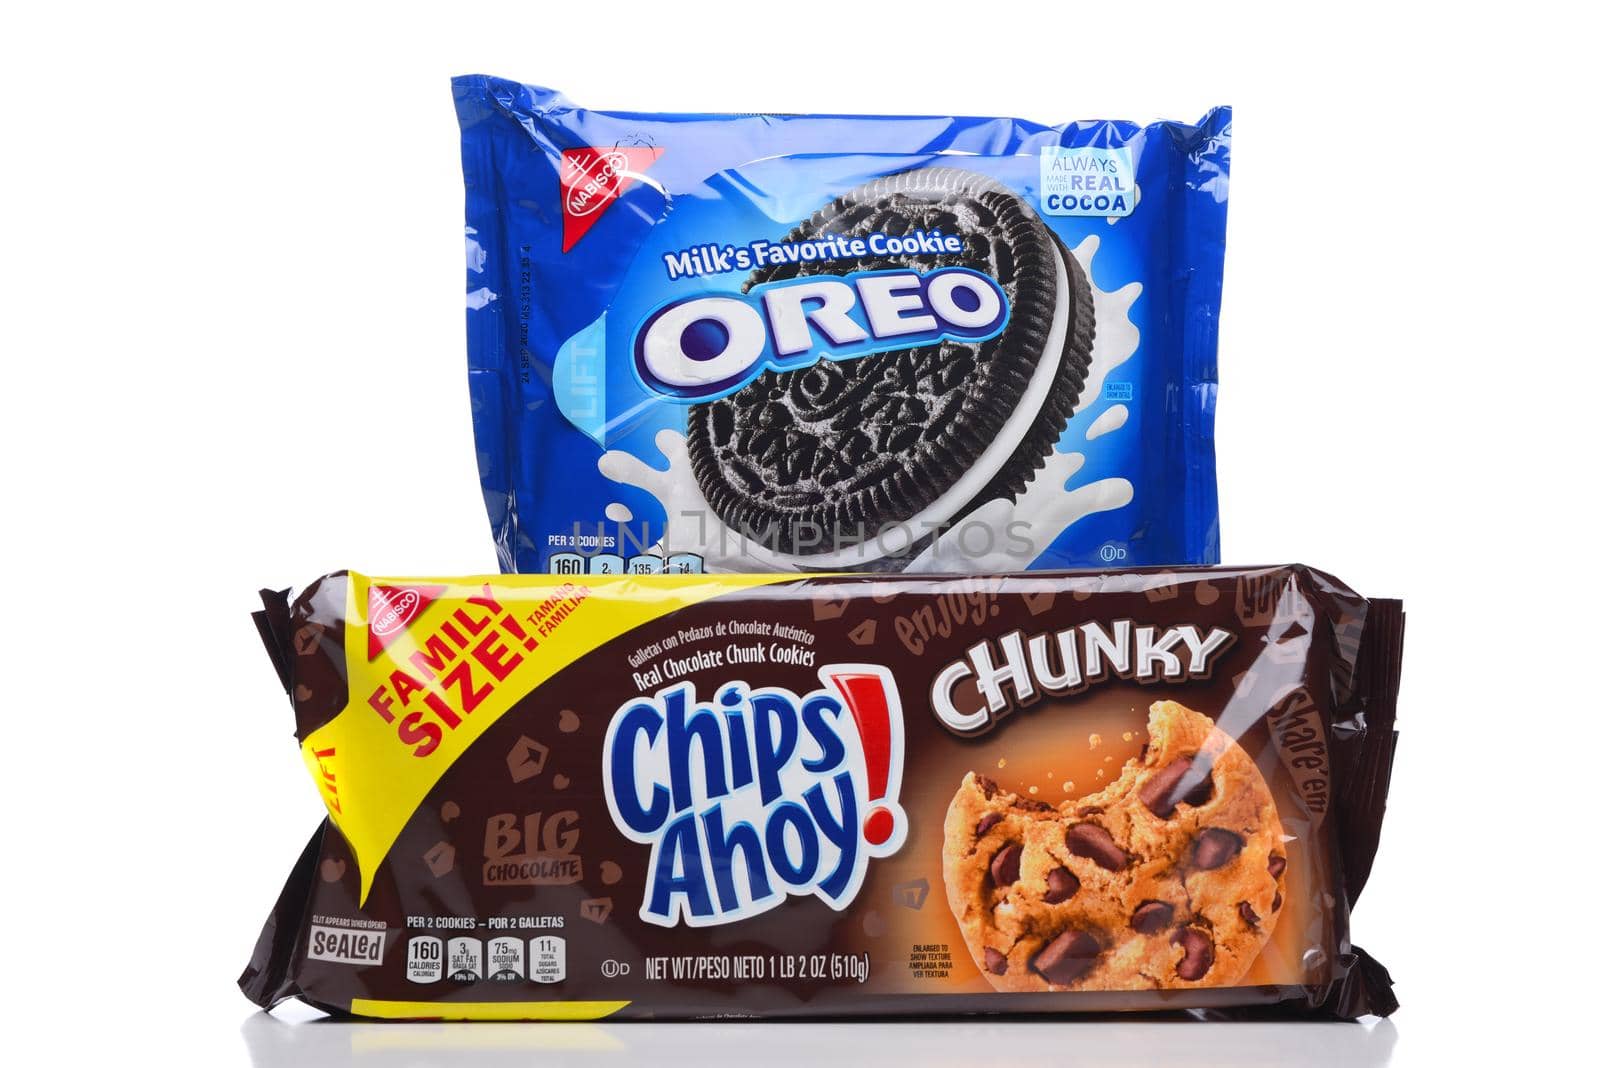 IRVINE, CALIFORNIA - 16 MAY 2020: A package of Nabisco Oreo Cookies and Chunky Chips Ahoy.  by sCukrov